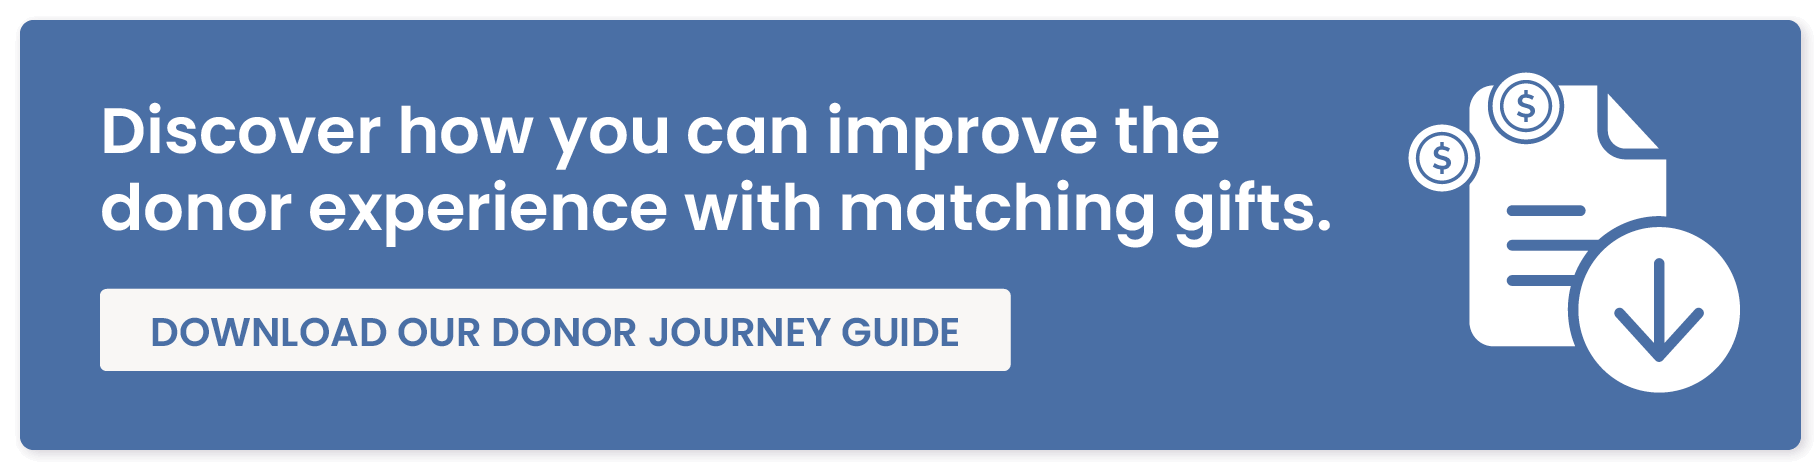 Explore how following data hygiene best practices improves the matching gift journey at your nonprofit.